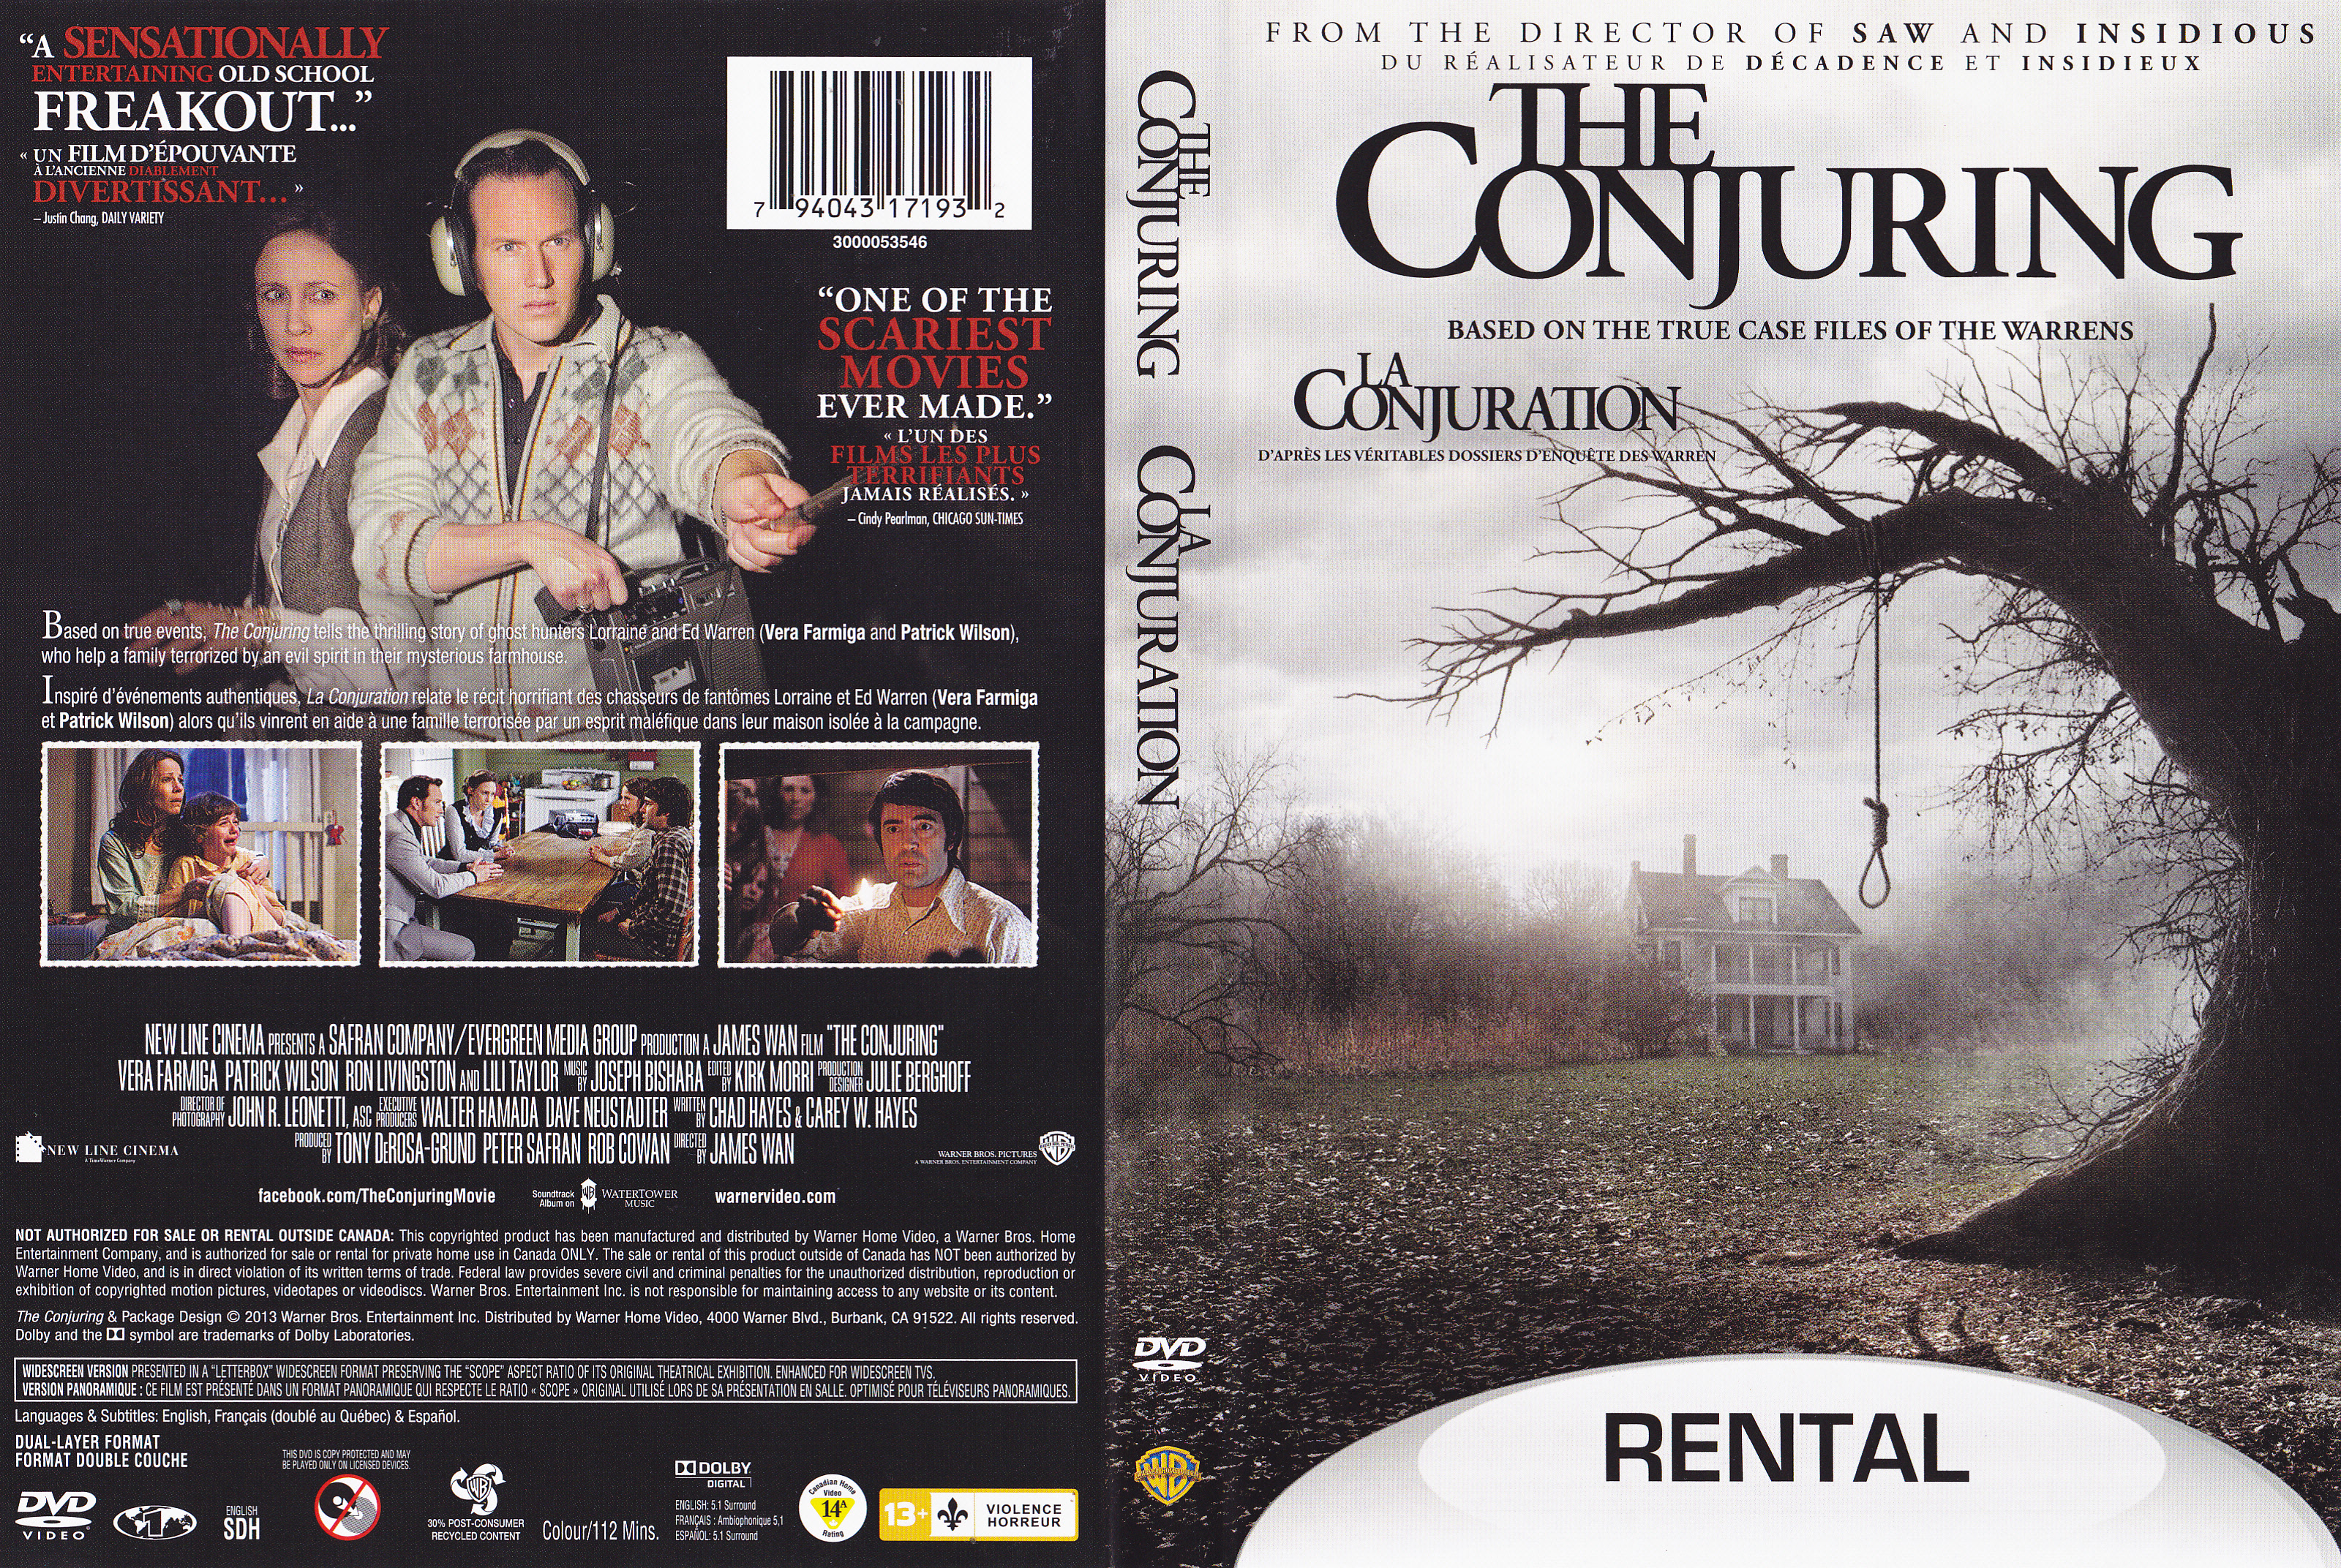 Jaquette DVD The conjuring - La conjuration (Canadienne)